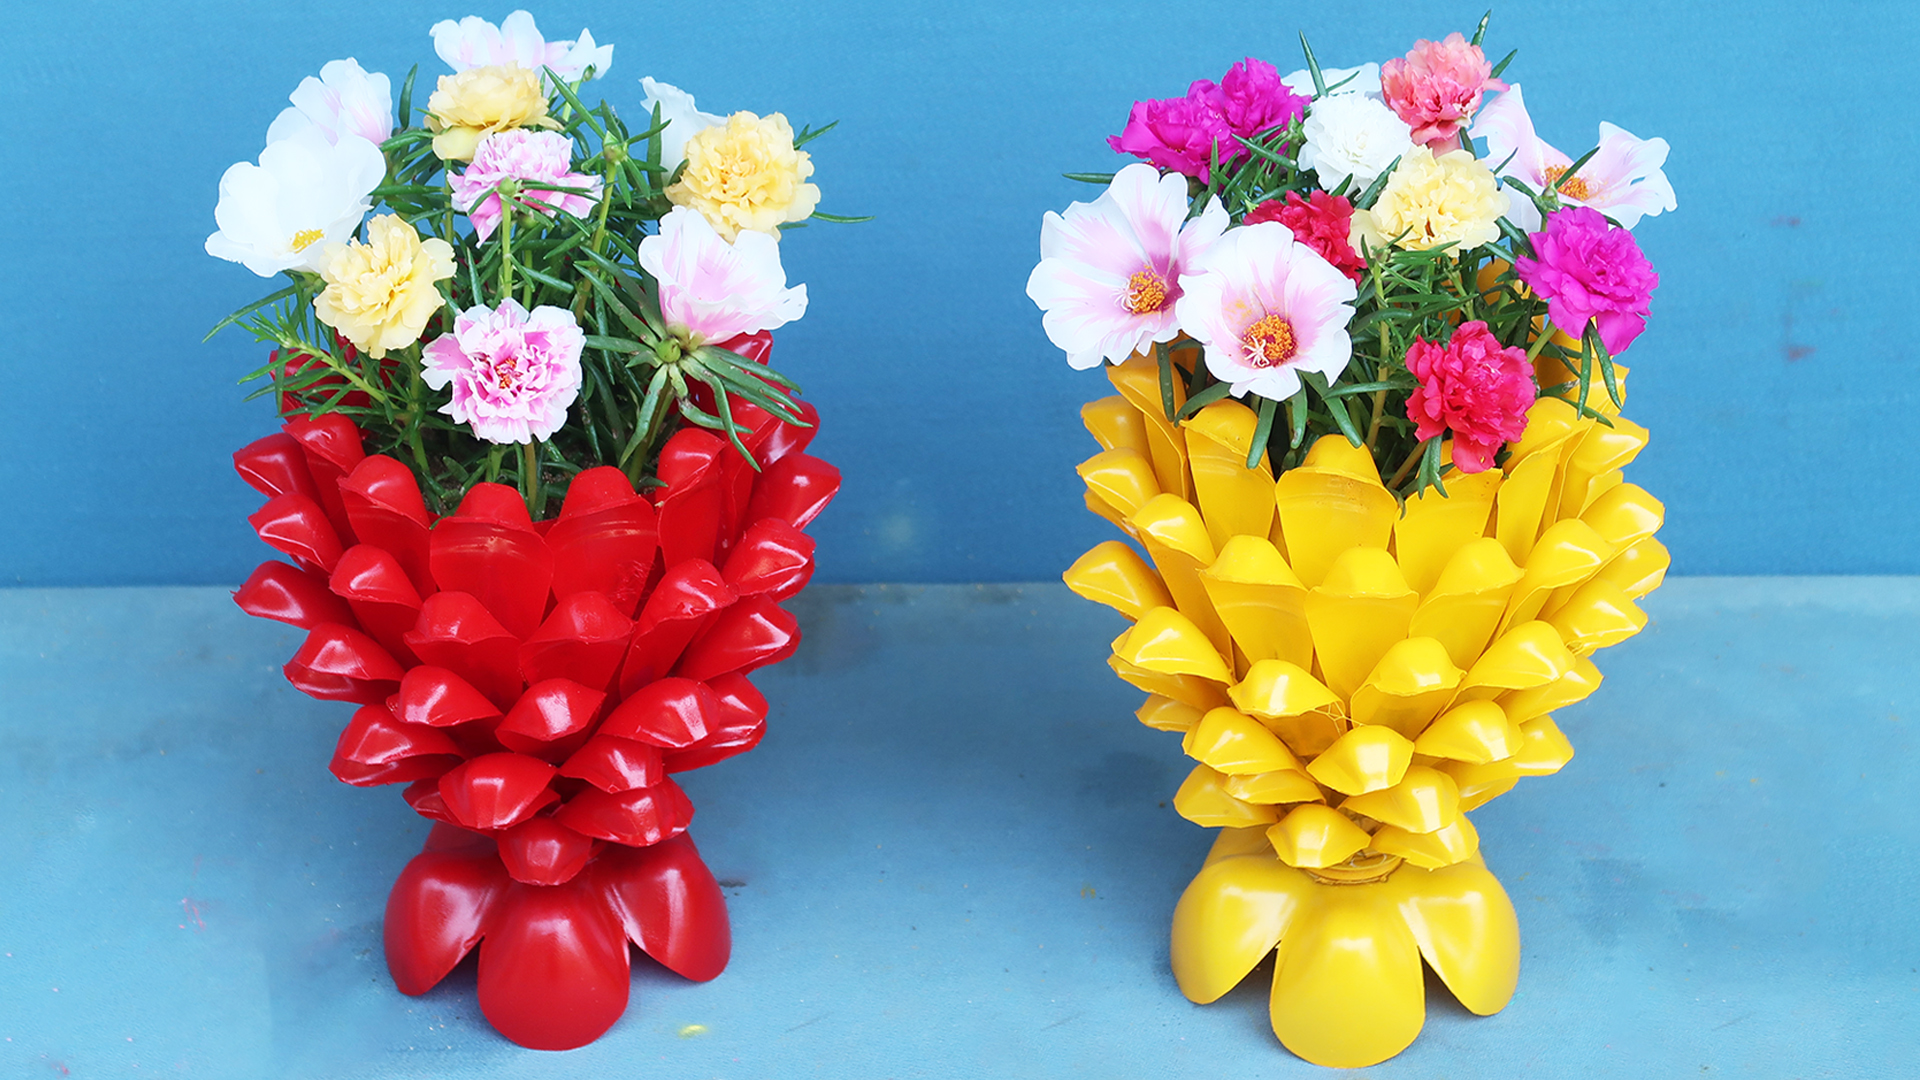 Creative flower pots from plastic bottles, How to make beautiful Portulaca Mossrose planters